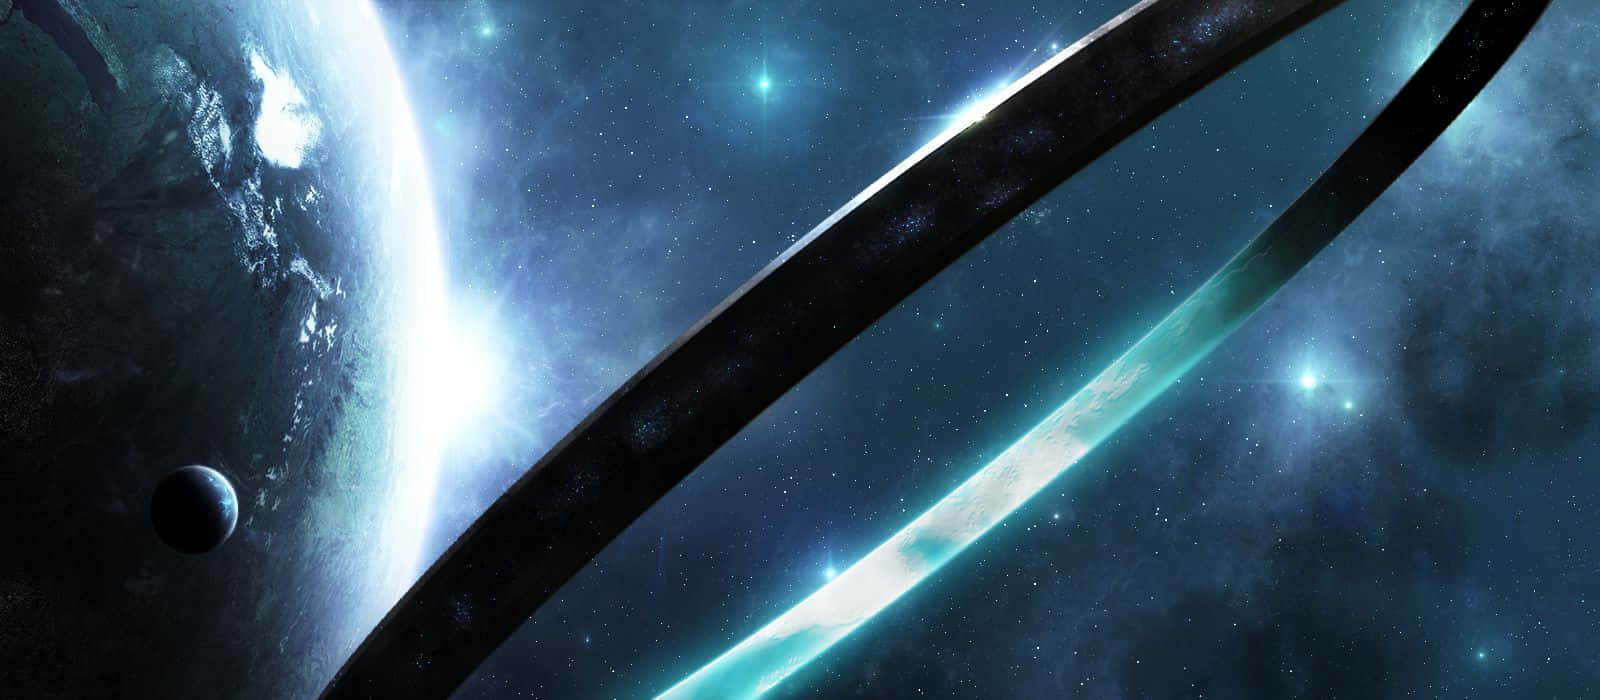 Halo Ring in the Galaxy Wallpaper